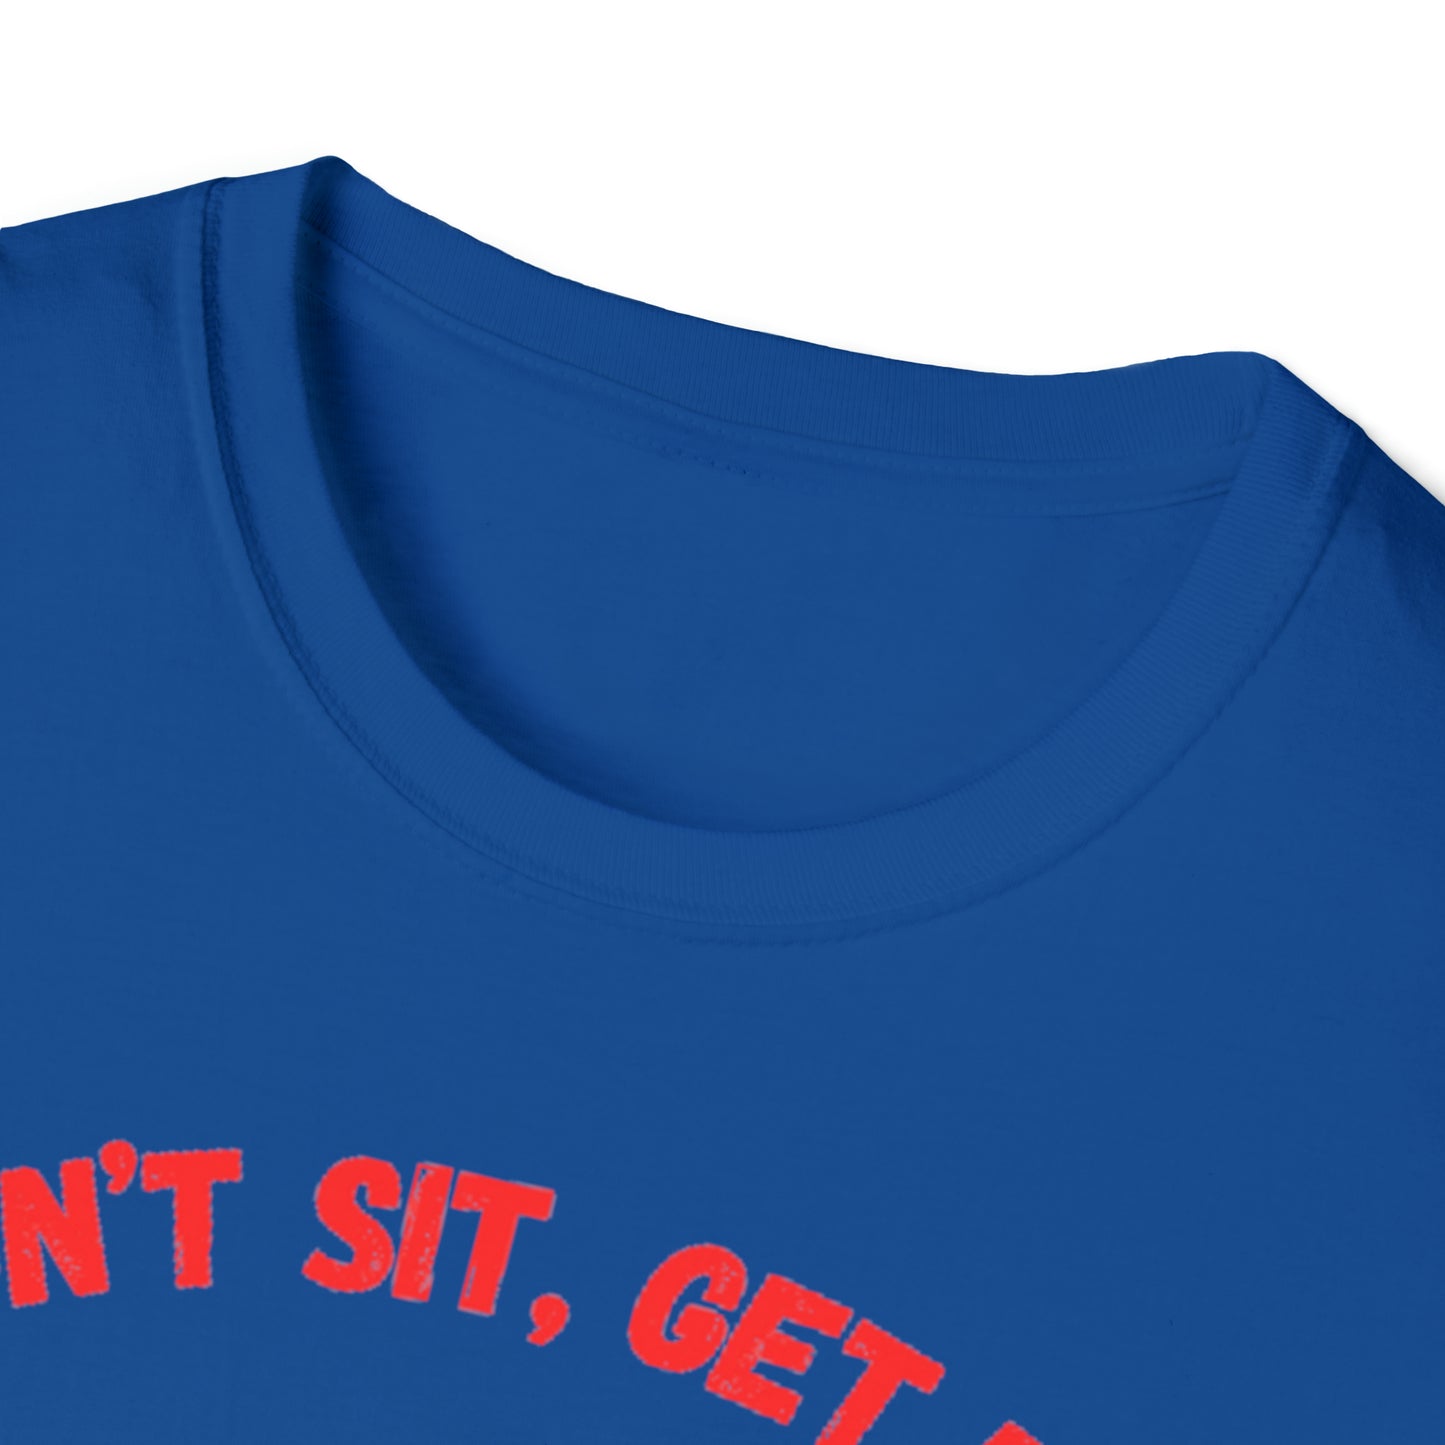 Don't Sit, Get Fit Unisex Softstyle T-Shirt